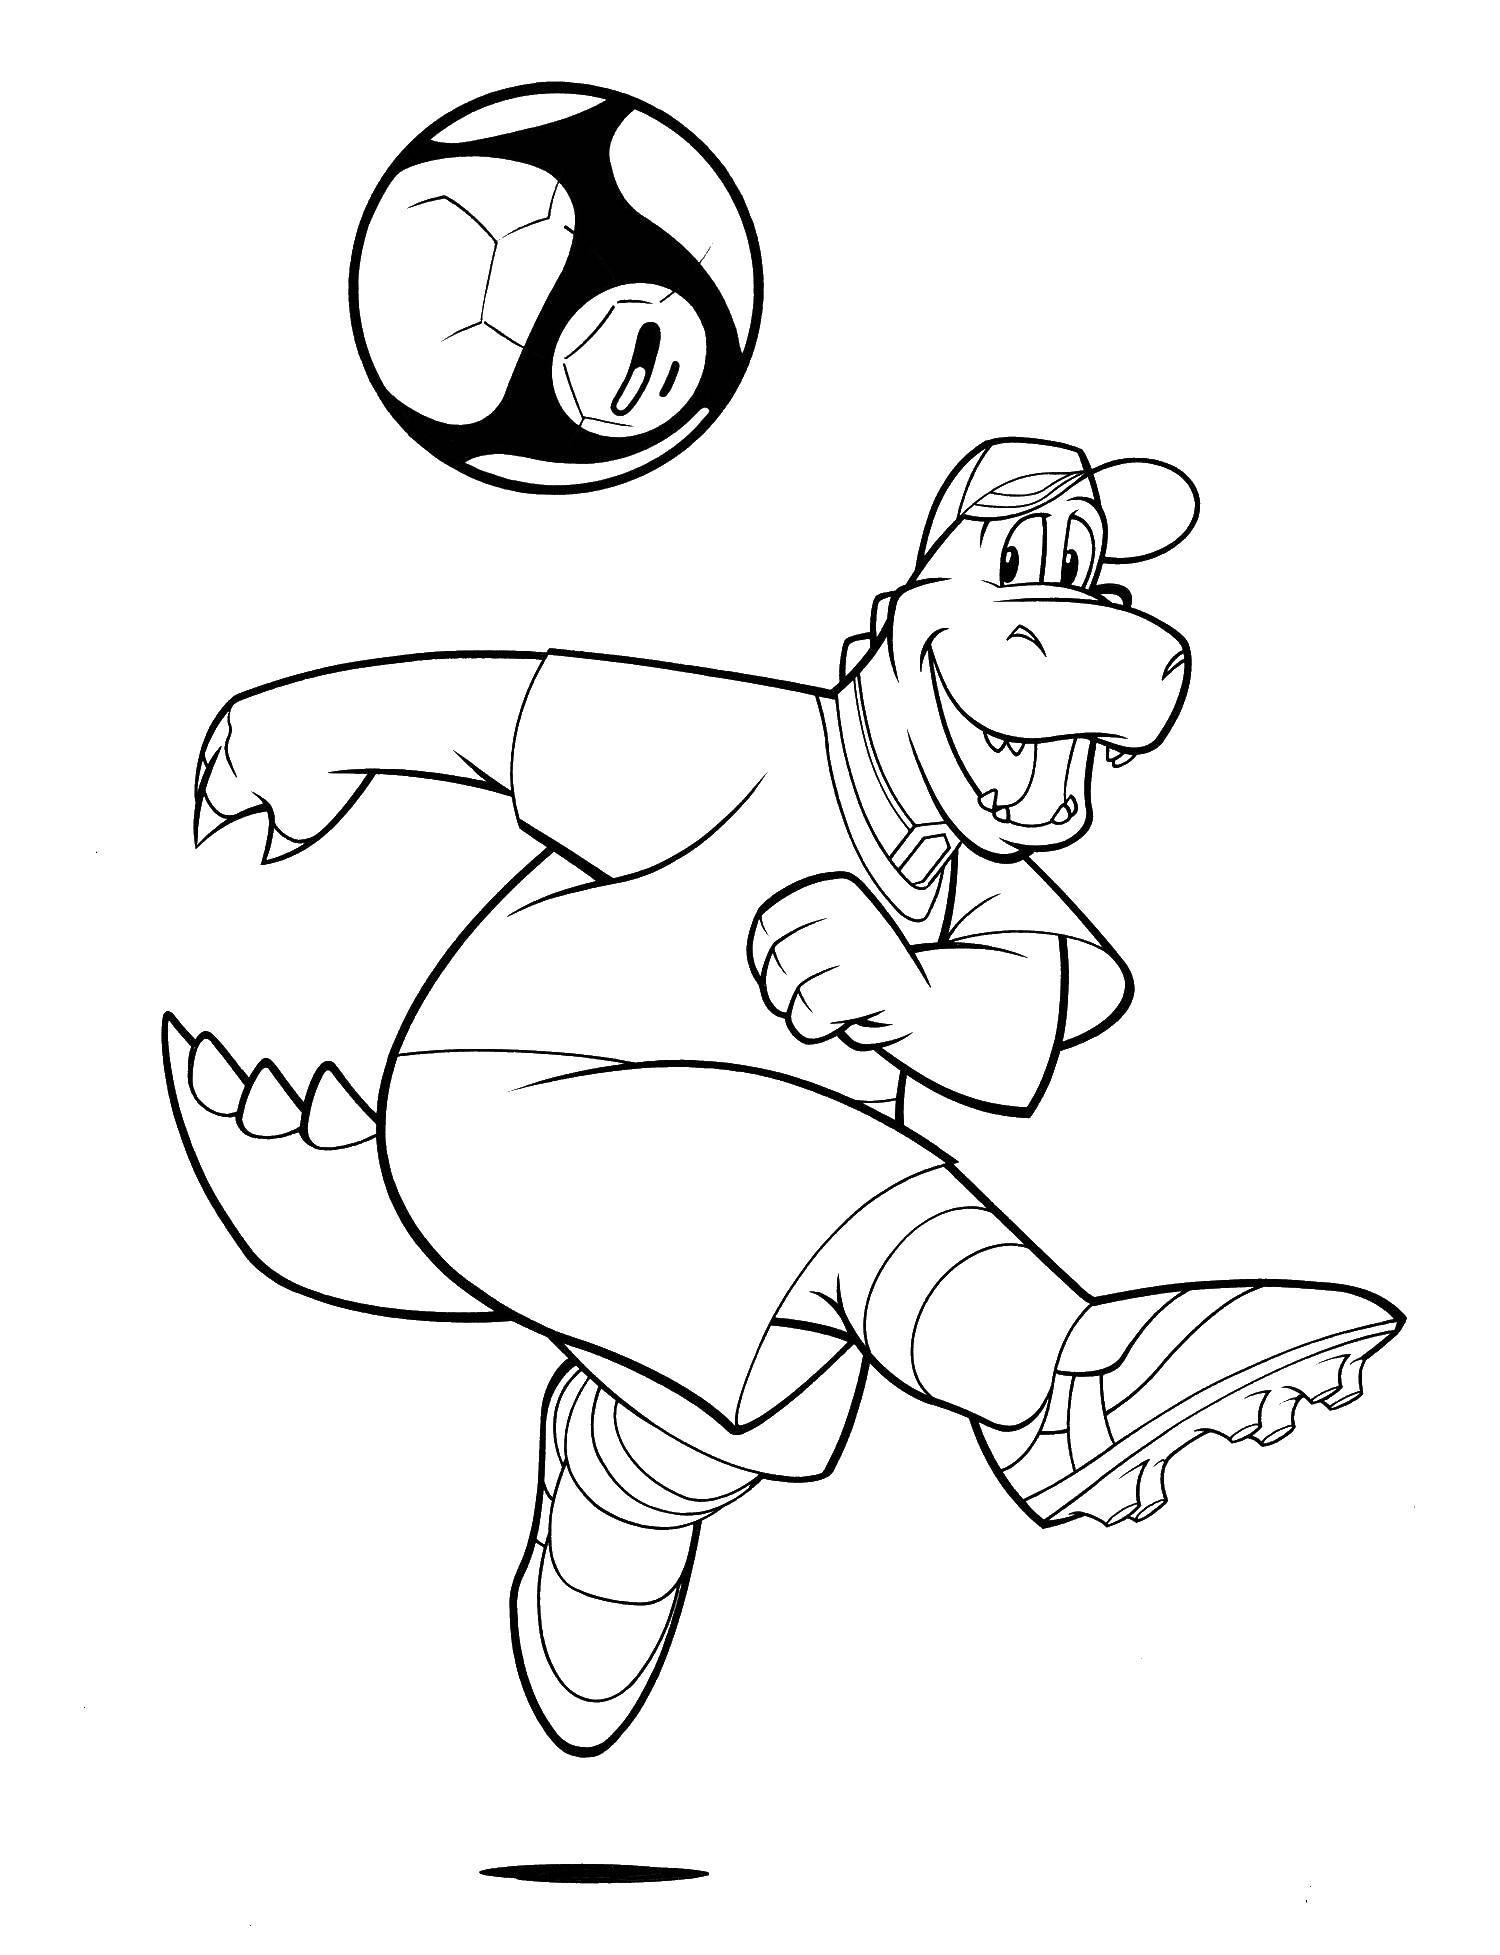 Coloring Crocodile plays football. Category sports. Tags:  sports, soccer, crocodile.